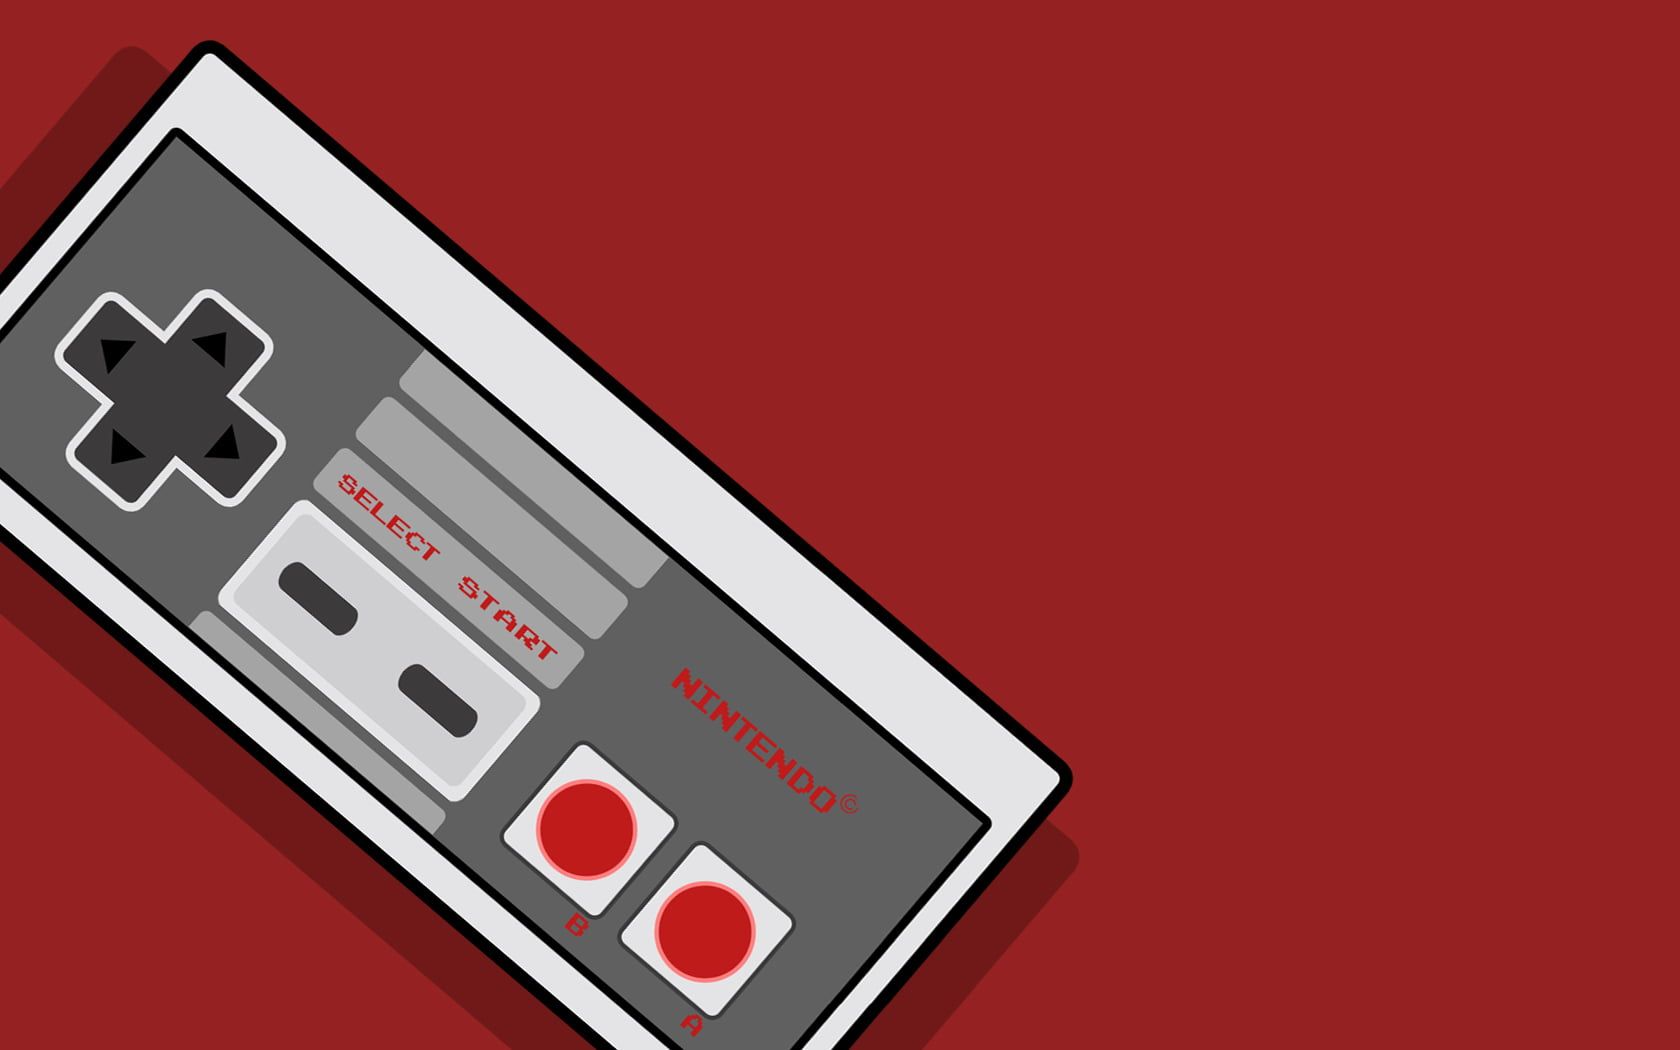 gray and white Nintendo game controller illustration #Nintendo video games #consoles #vintage red background. Video games nintendo, HD wallpaper, Game controller